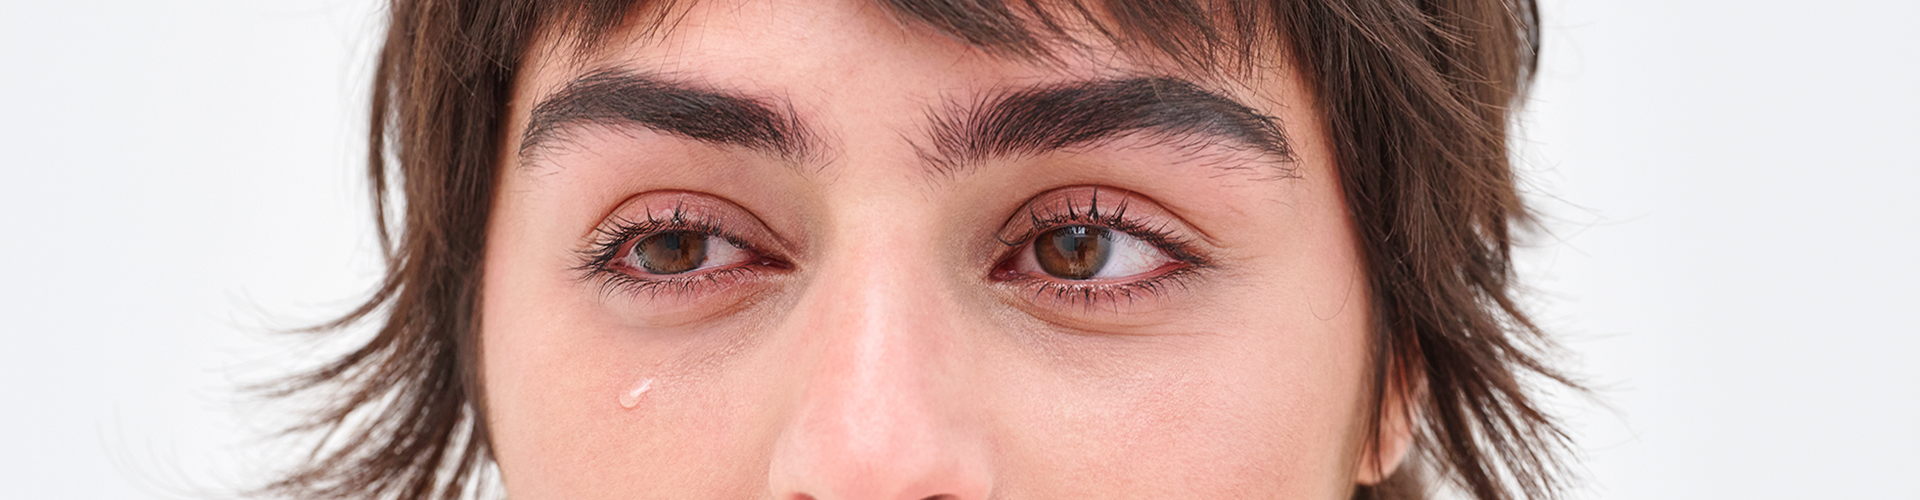 Watery Eyes: Causes, Treatment, and More